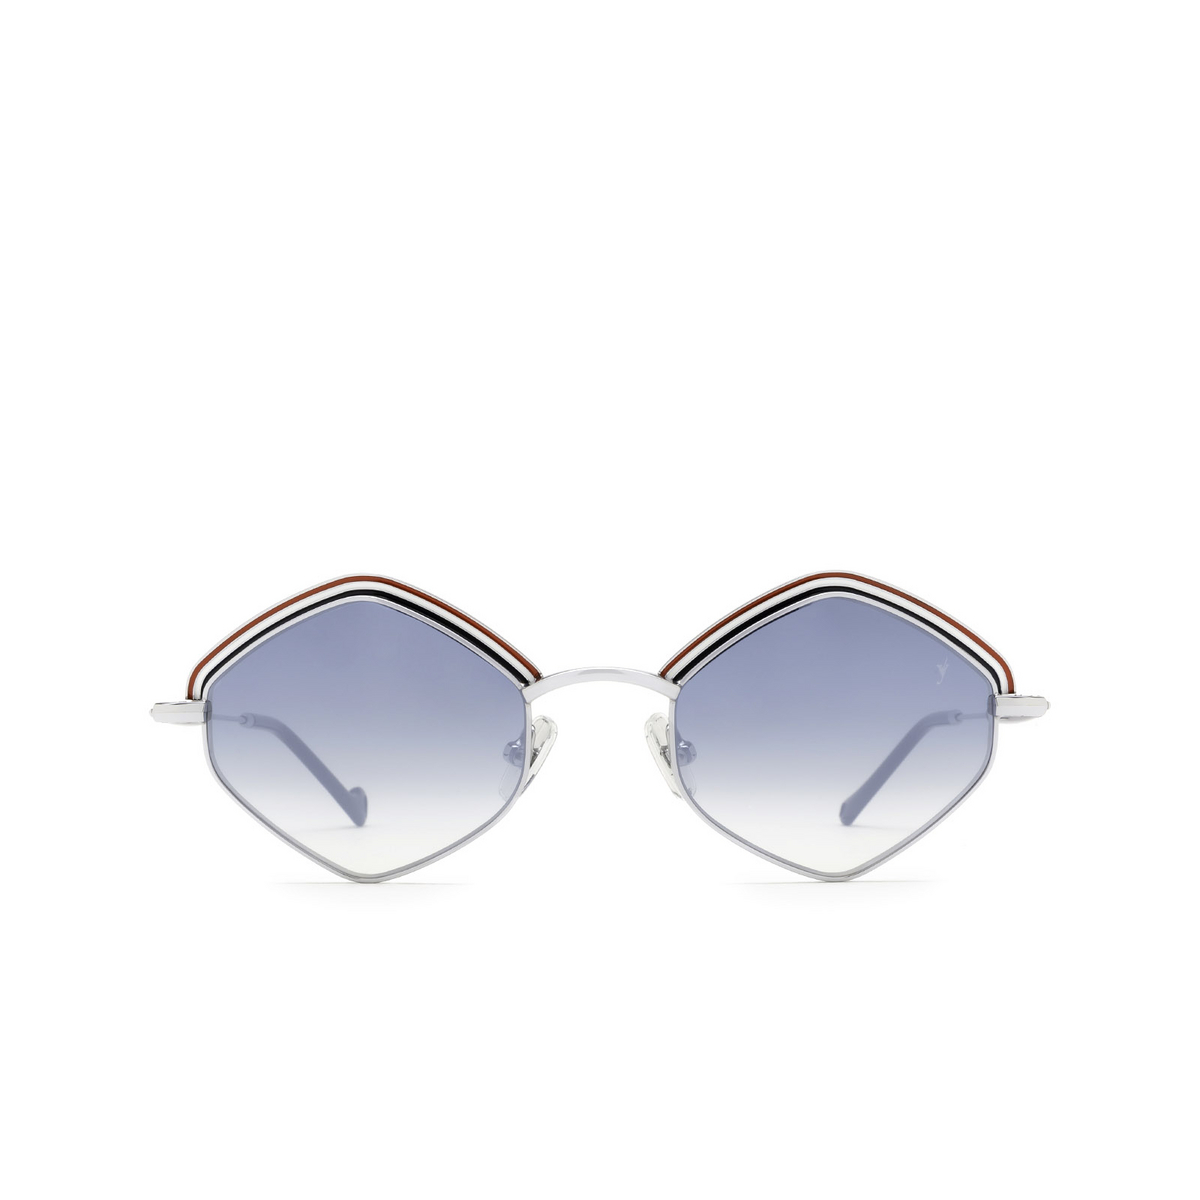 Eyepetizer® Irregular Sunglasses: Tomber Sun color Blue And Silver C.1-26F - front view.